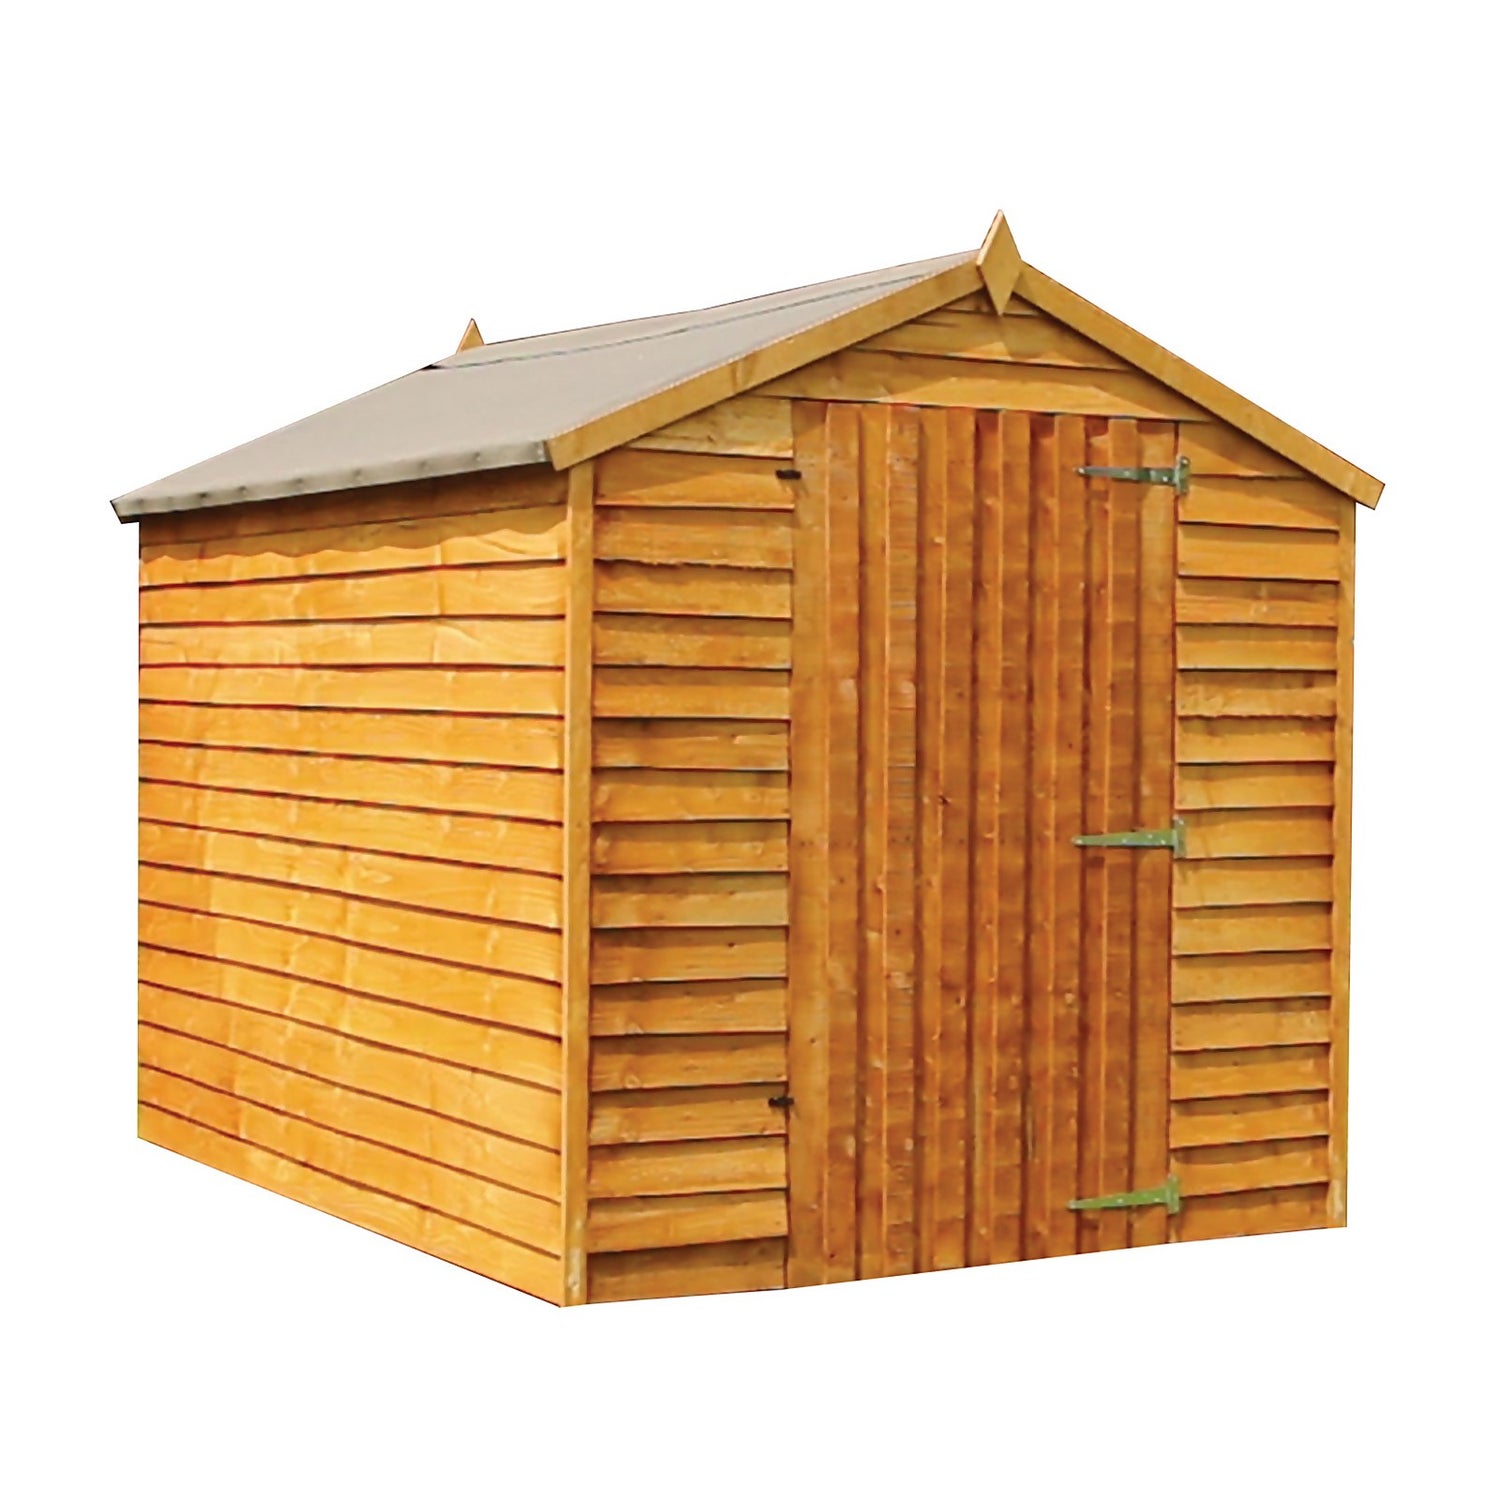 Mercia 8x6ft Overlap Apex Windowless Shed